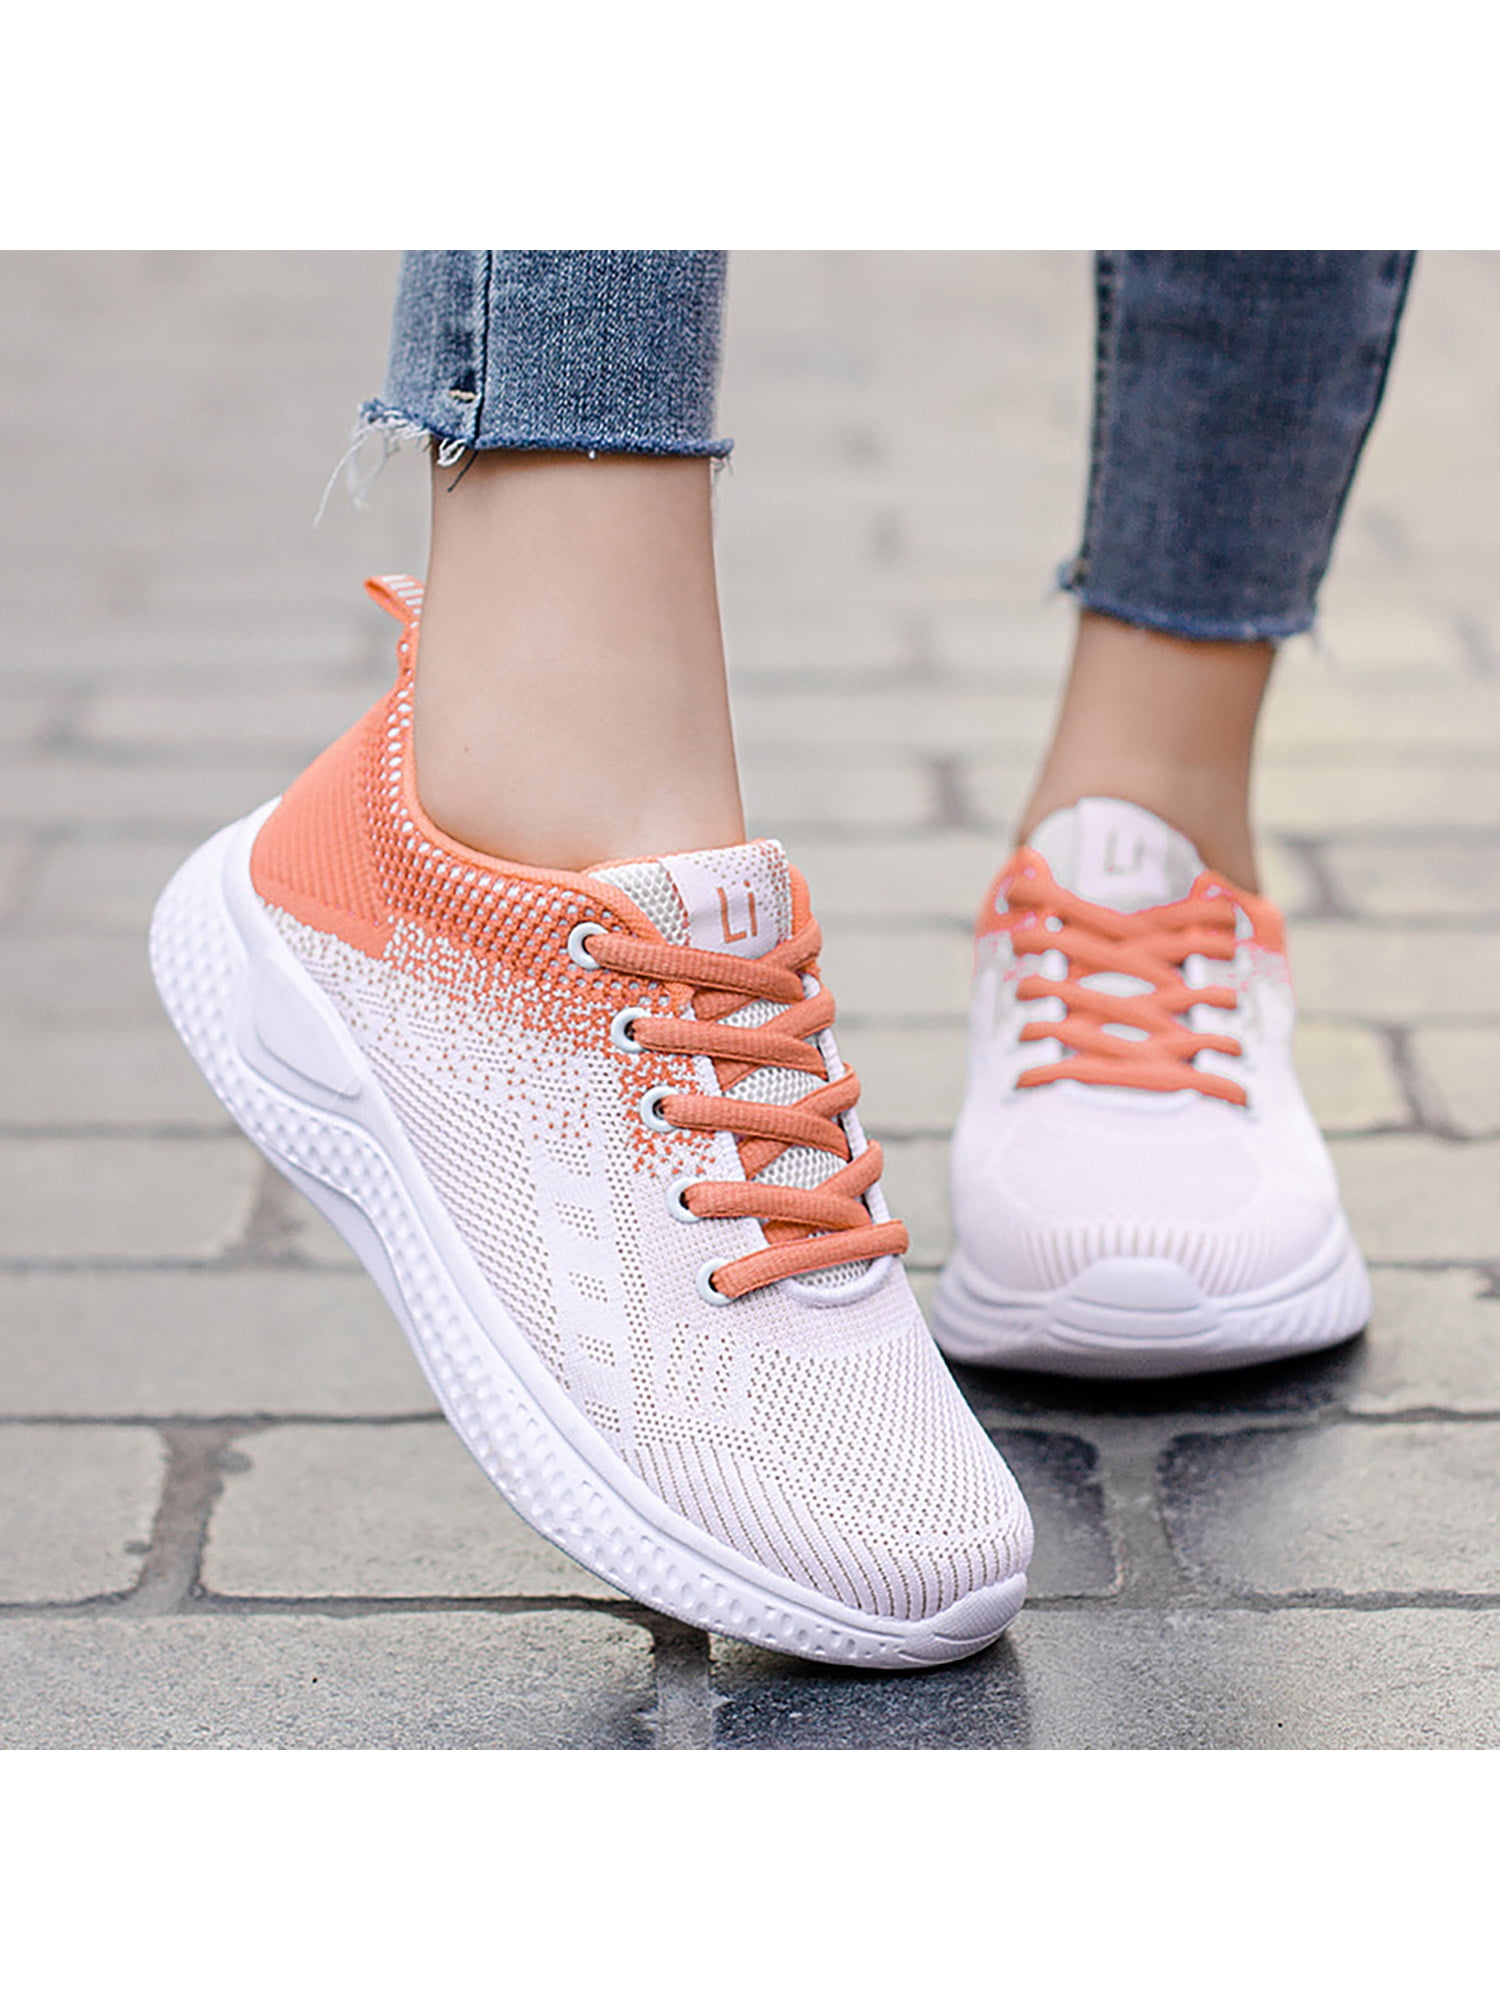 Women's Trainers Casual Sport Running Sneakers Tennis Shoes Breathable Pink